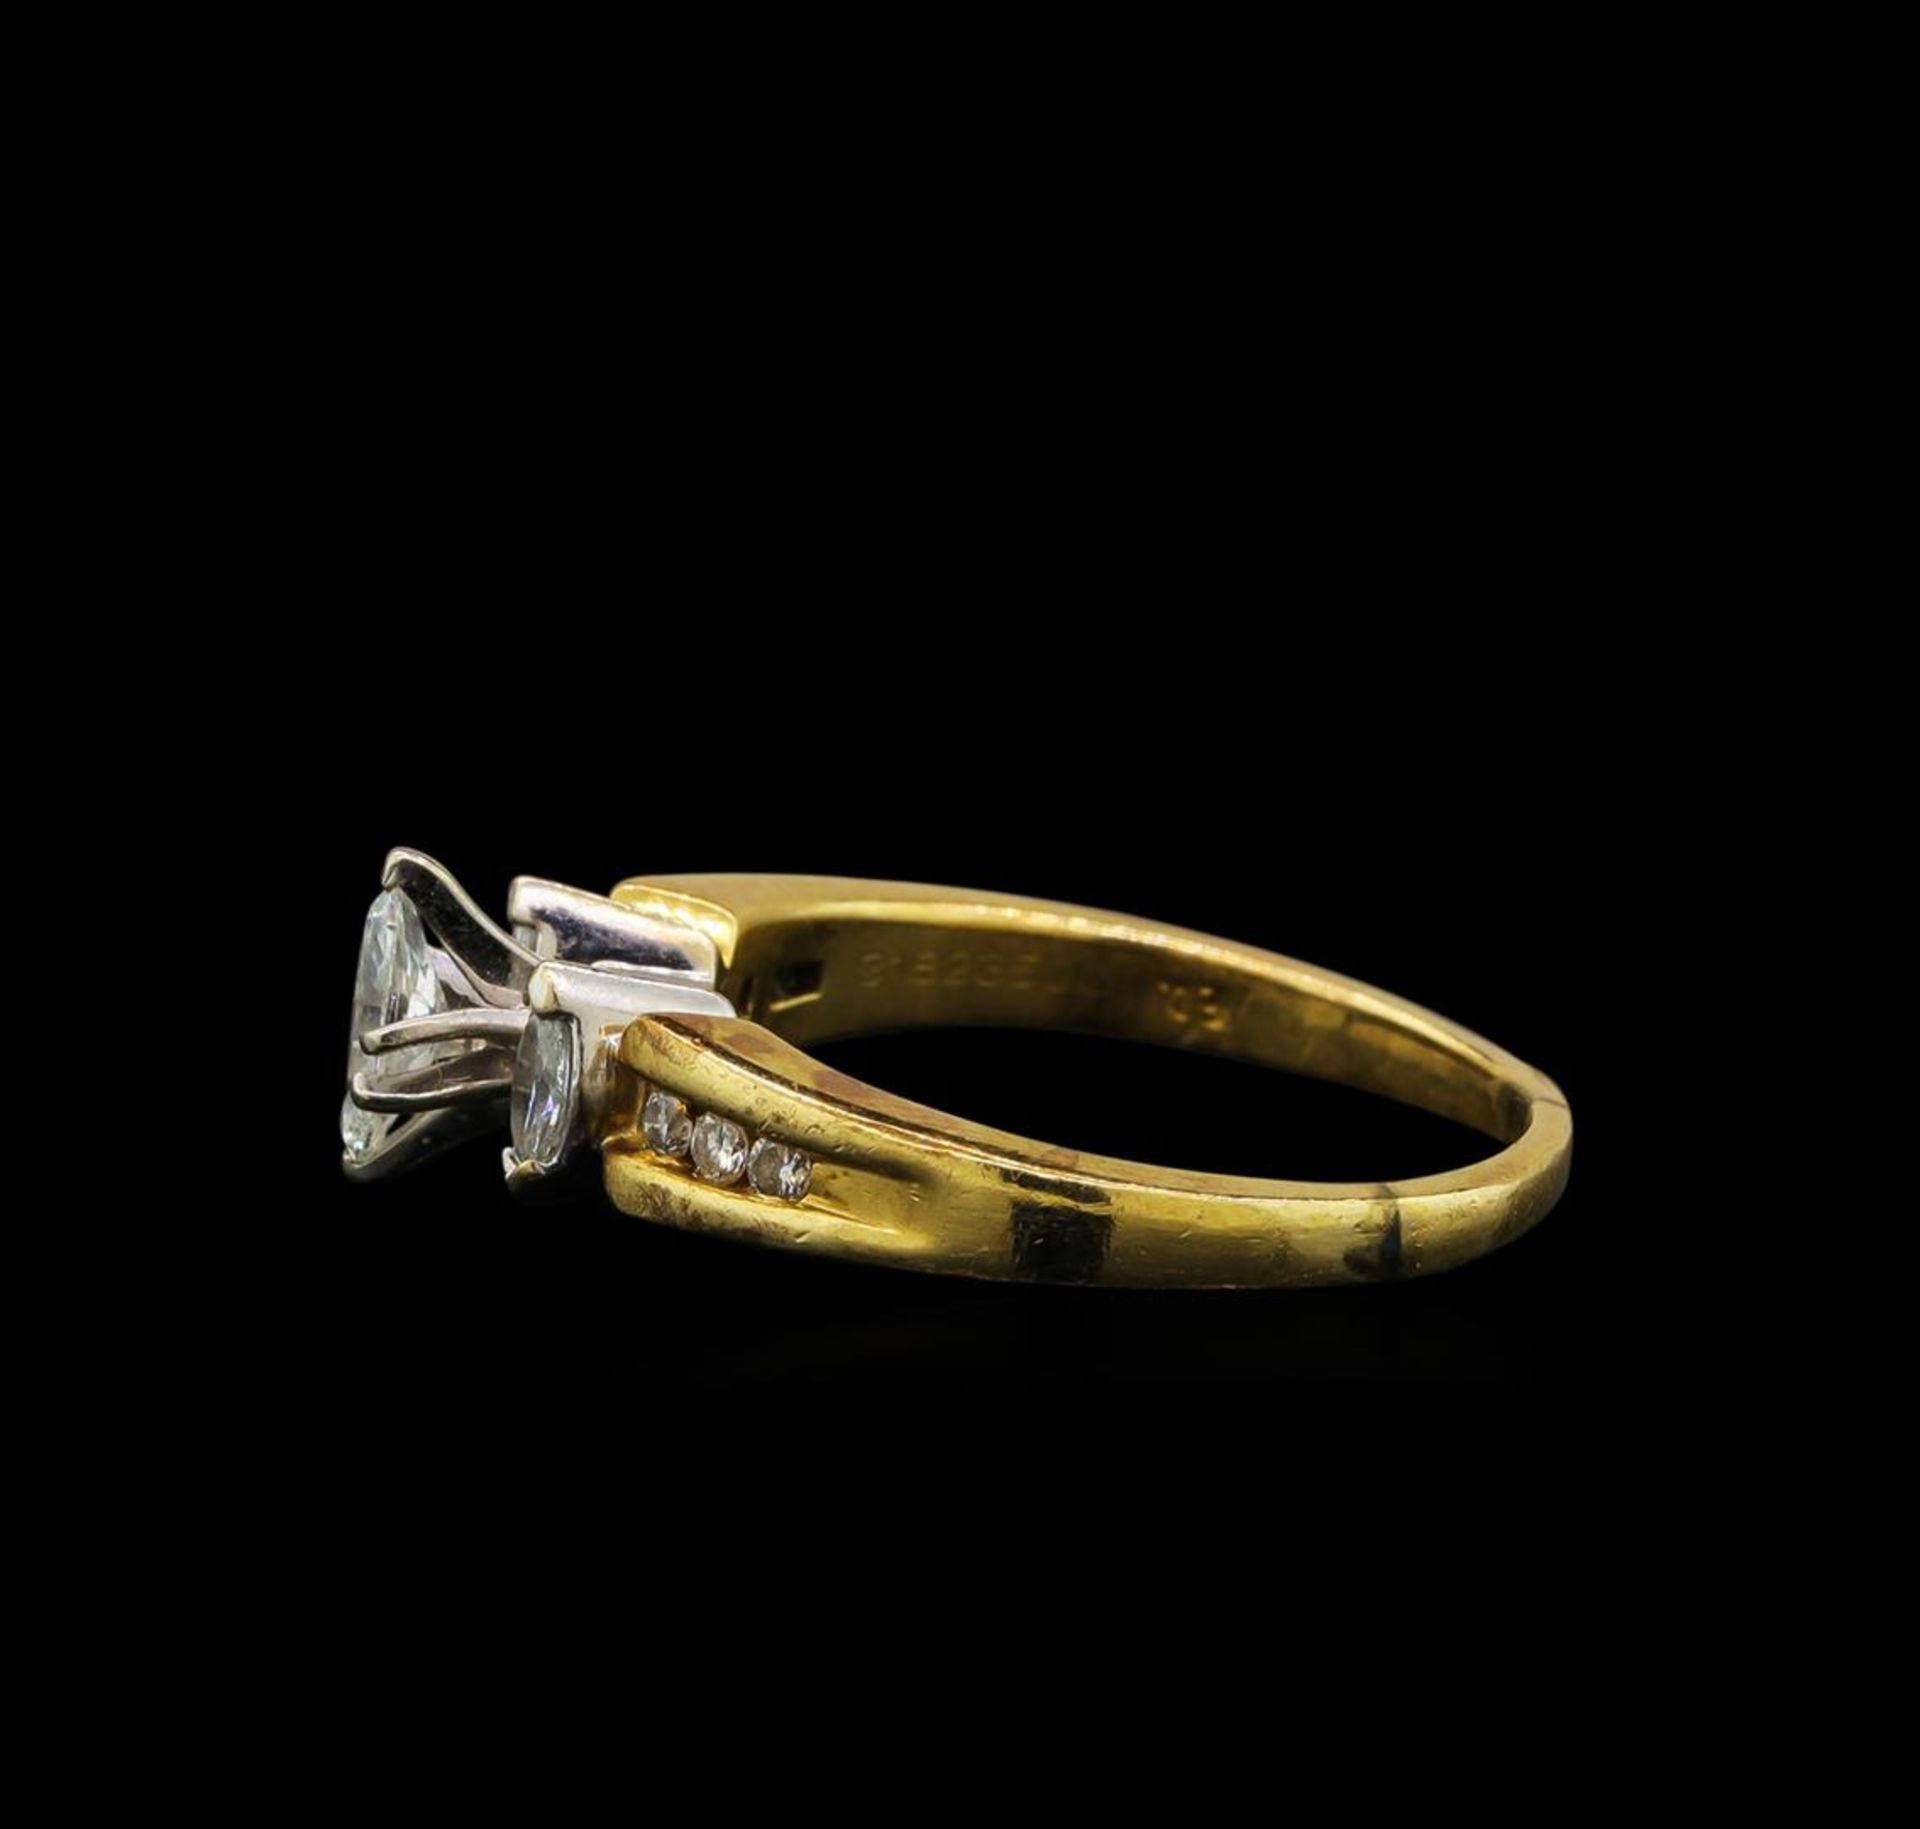 0.53 ctw Diamond Ring - 14KT Yellow and White Gold - Image 3 of 5